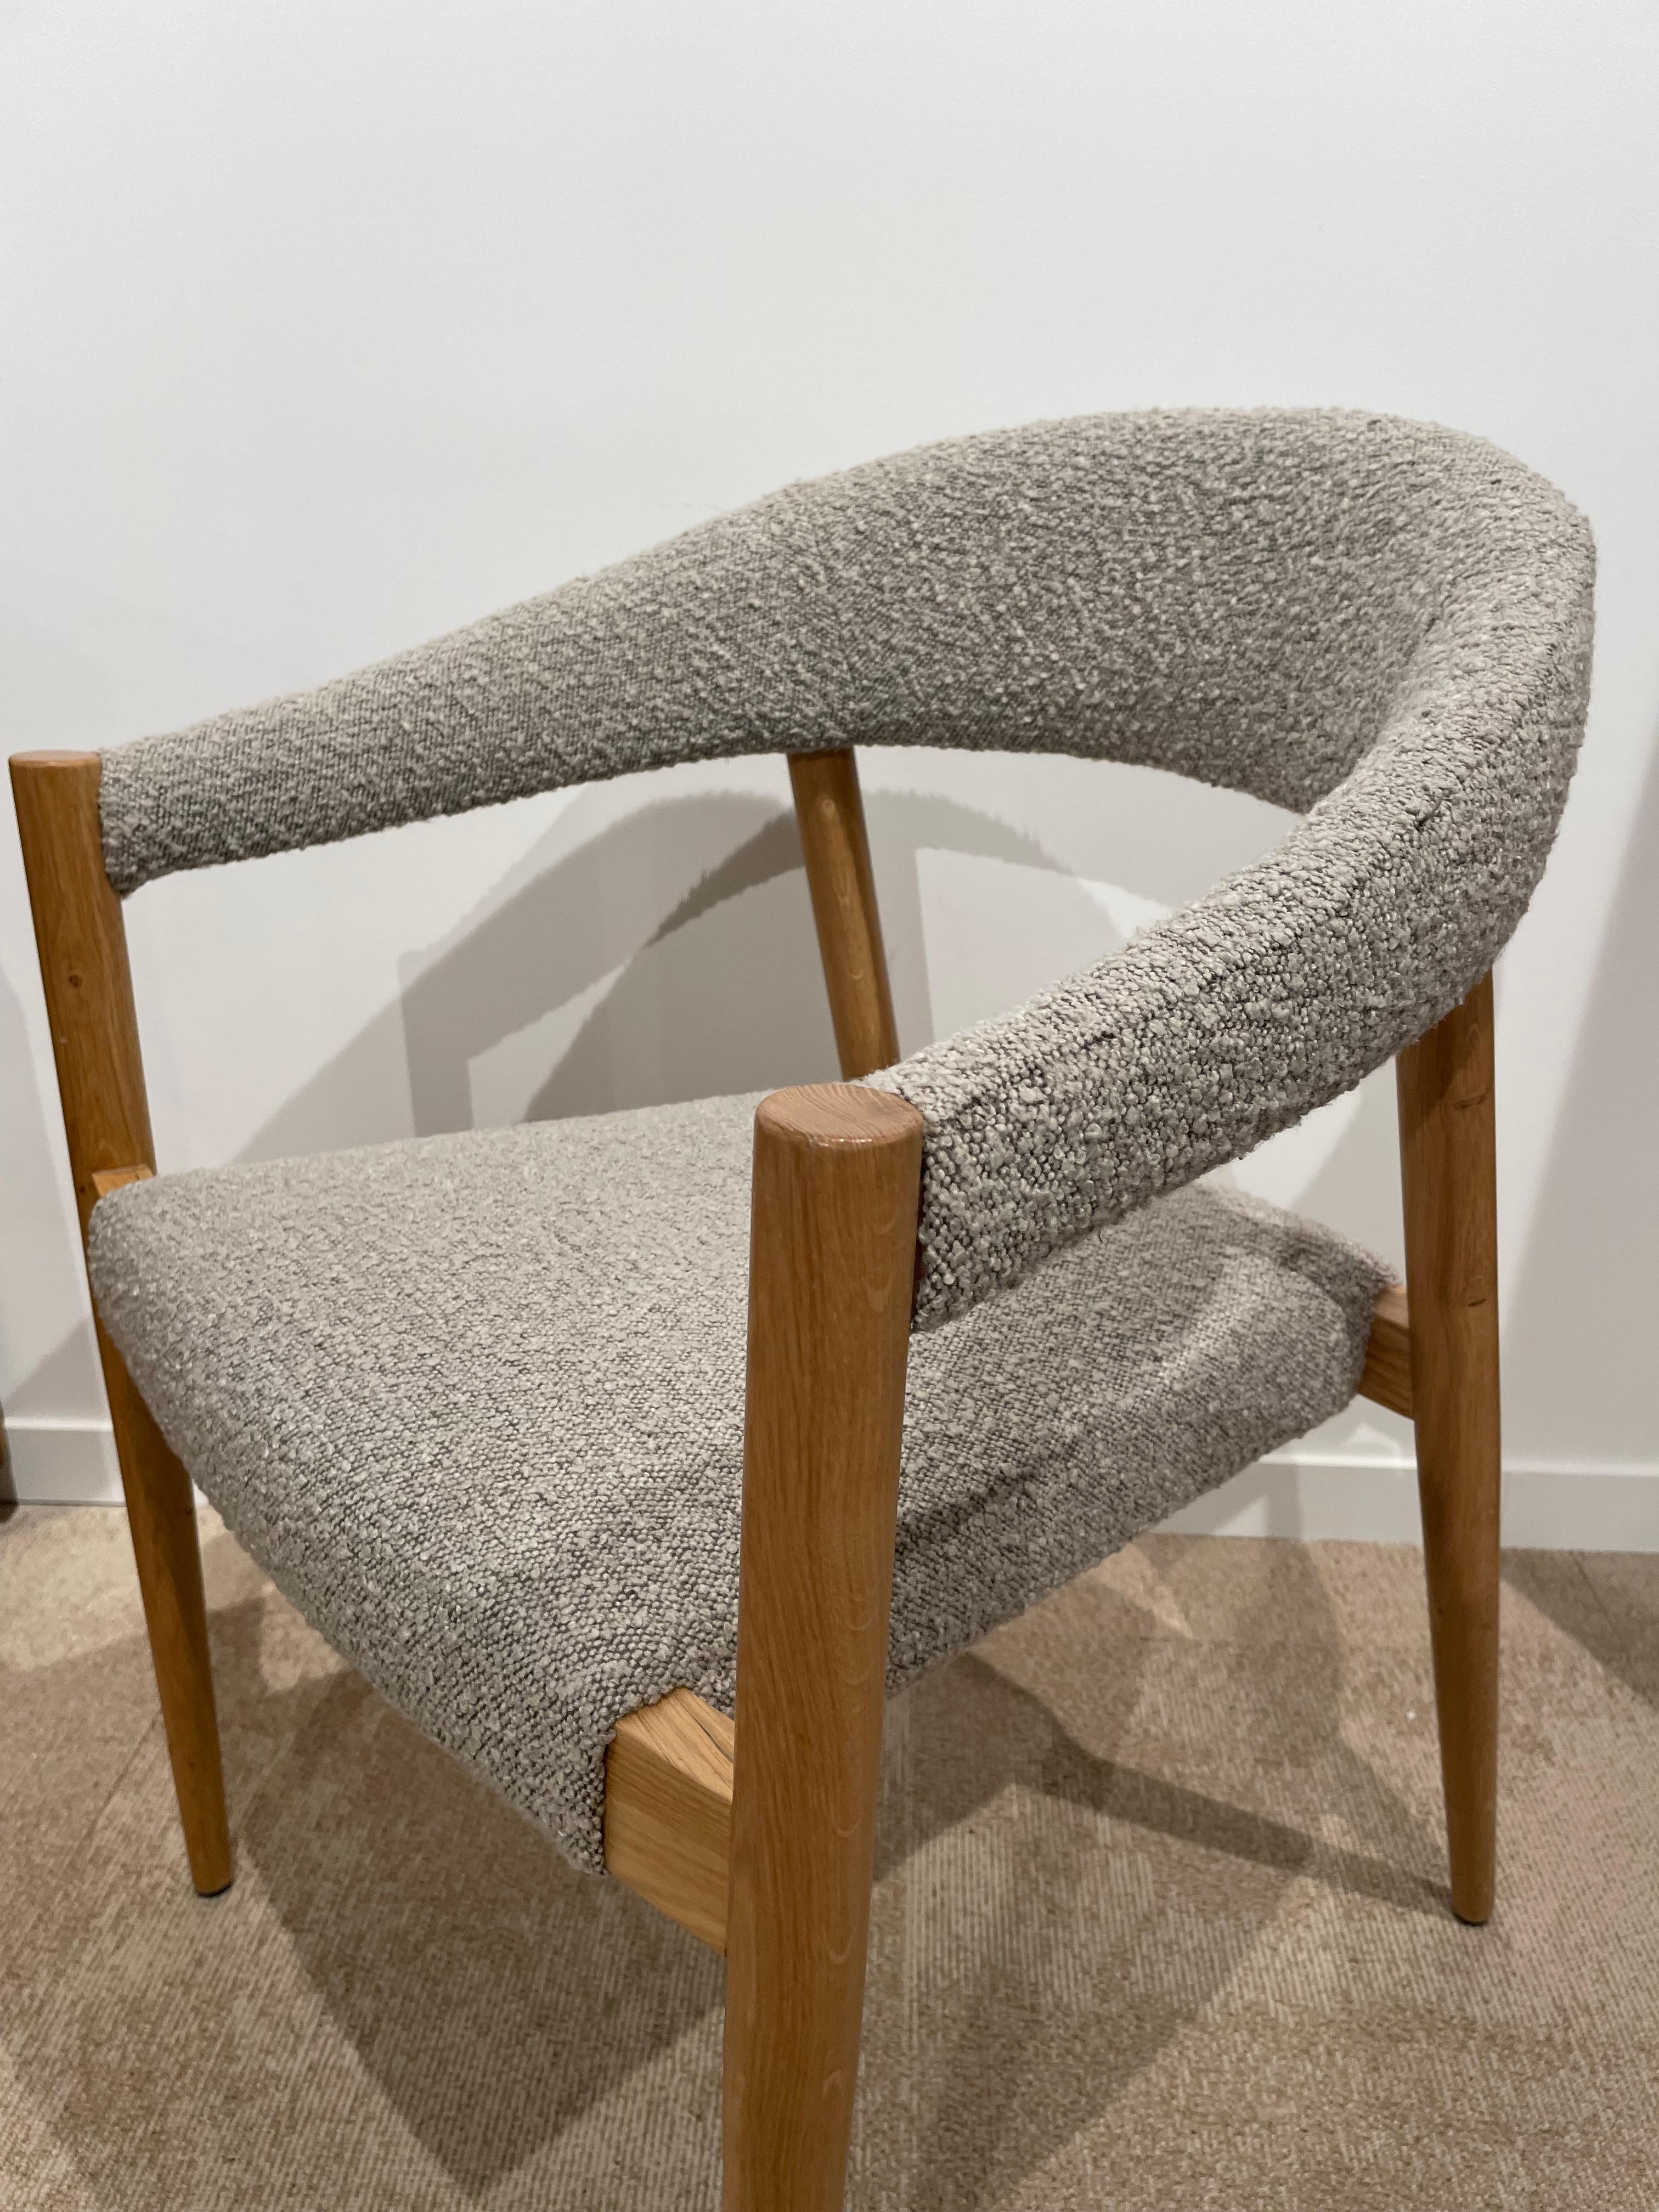 1960s Danish Design and Scandinavian Style Wooden and Bouclé Fabric Chair For Sale 5